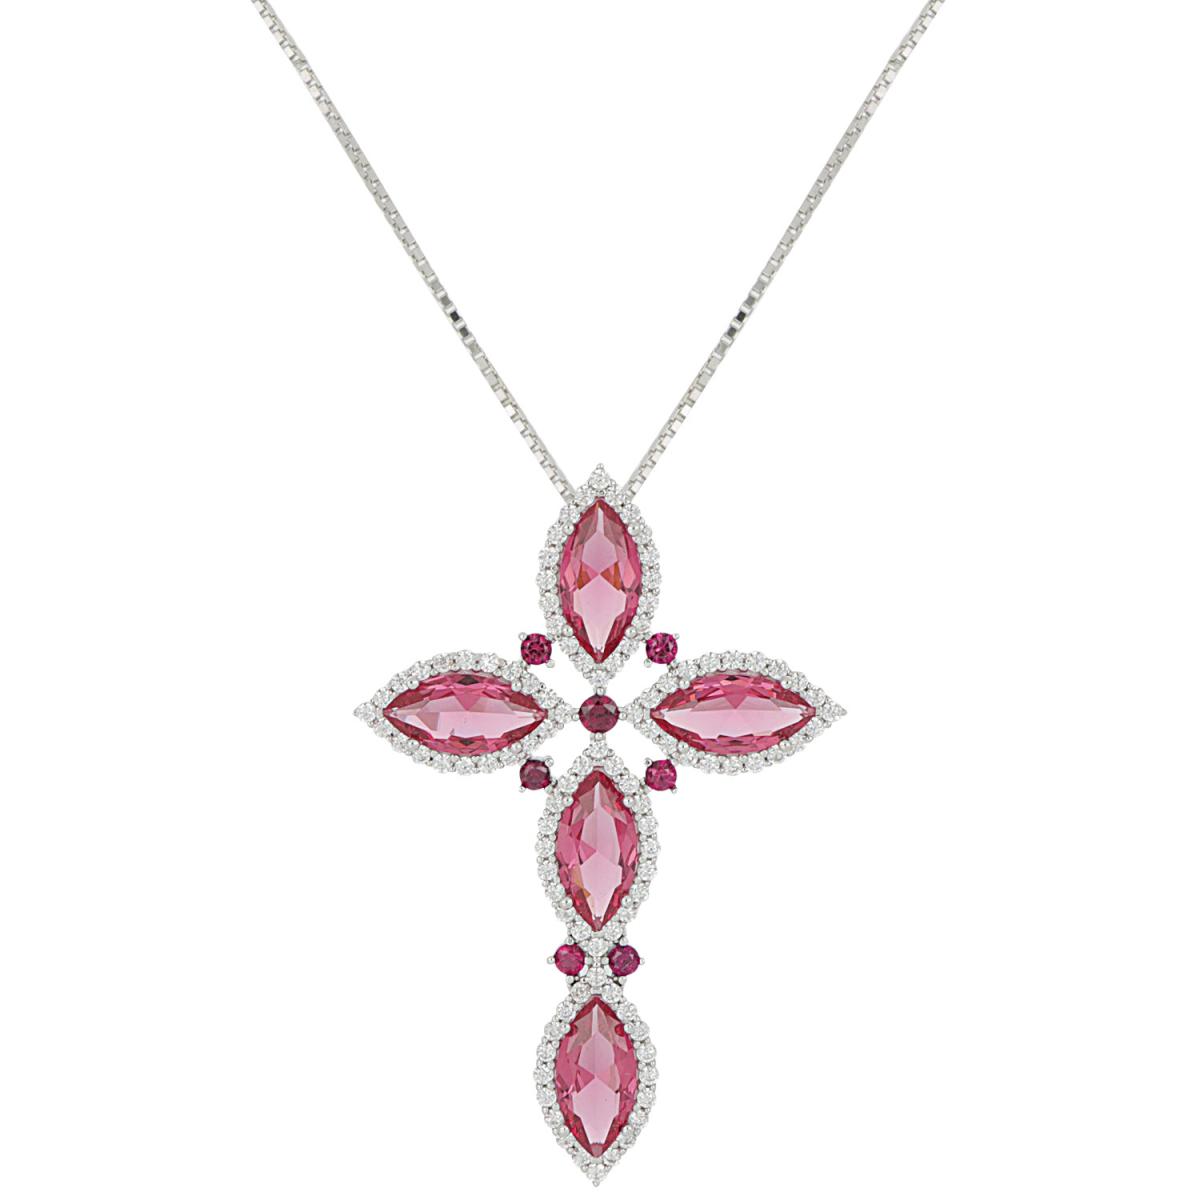 Cross necklace in 925 rhodium-plated silver with zircons and siamites available in various colors - ZCL1406